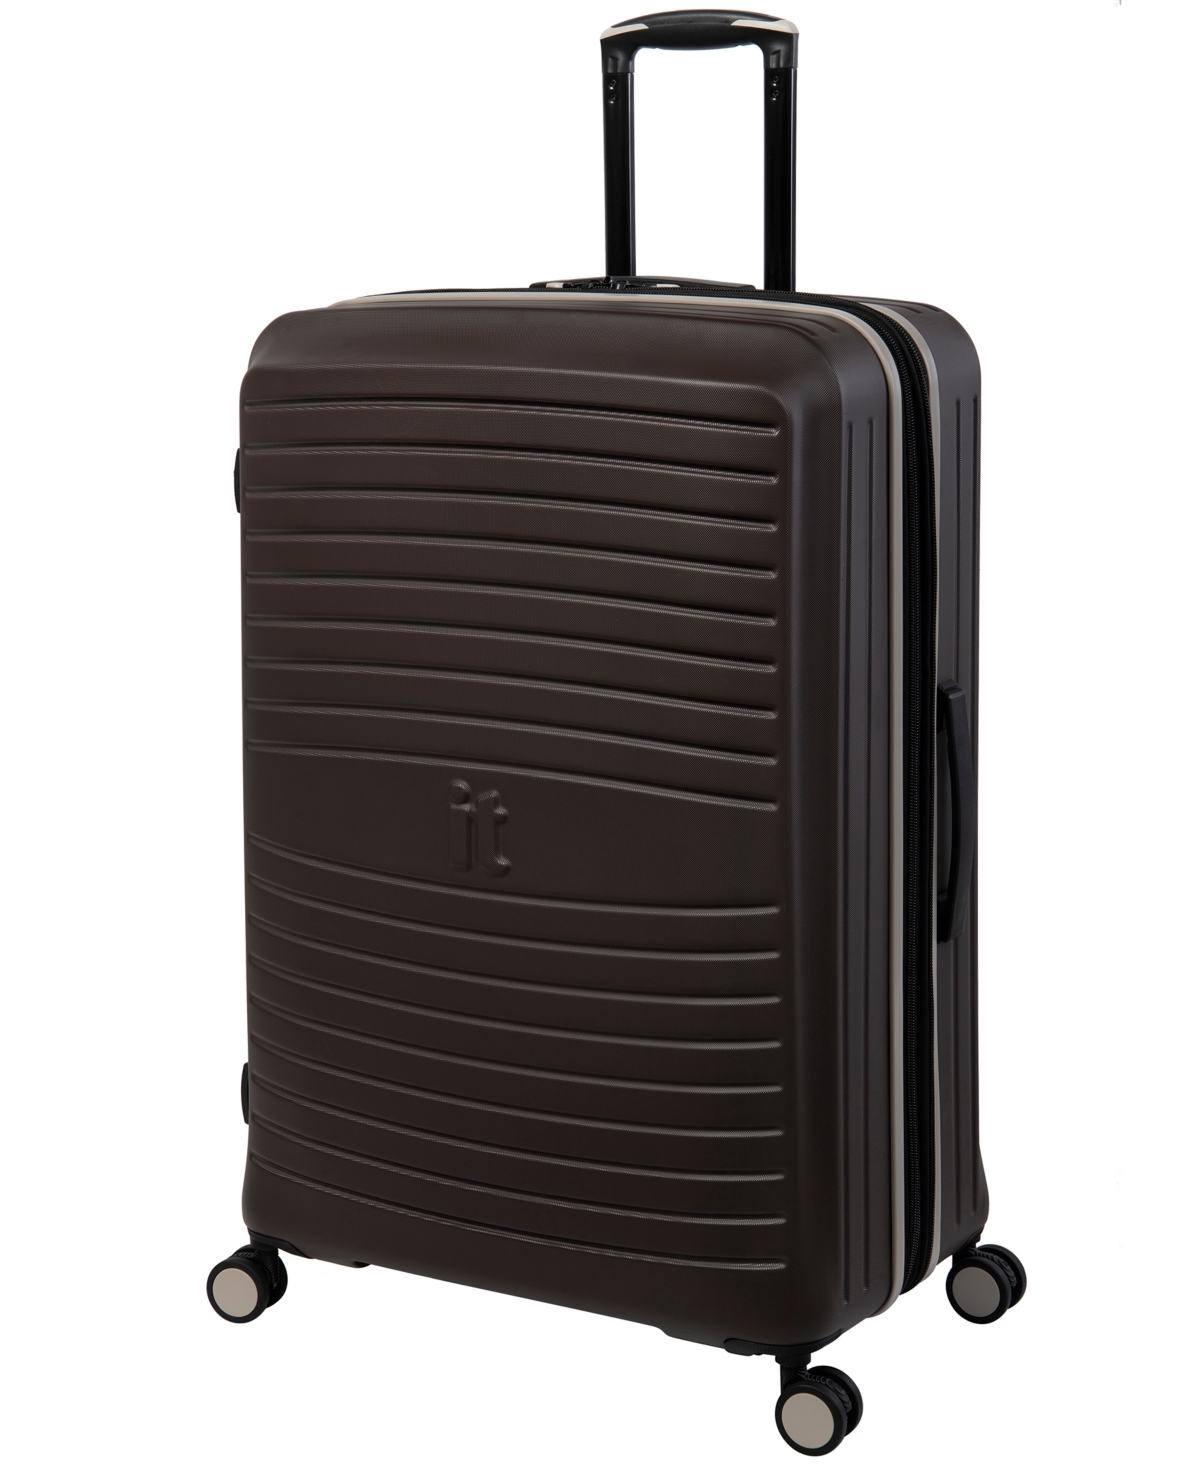 19" Hardside 8-Wheel Expandable Spinner Carry-On Luggage - Coffee Bean